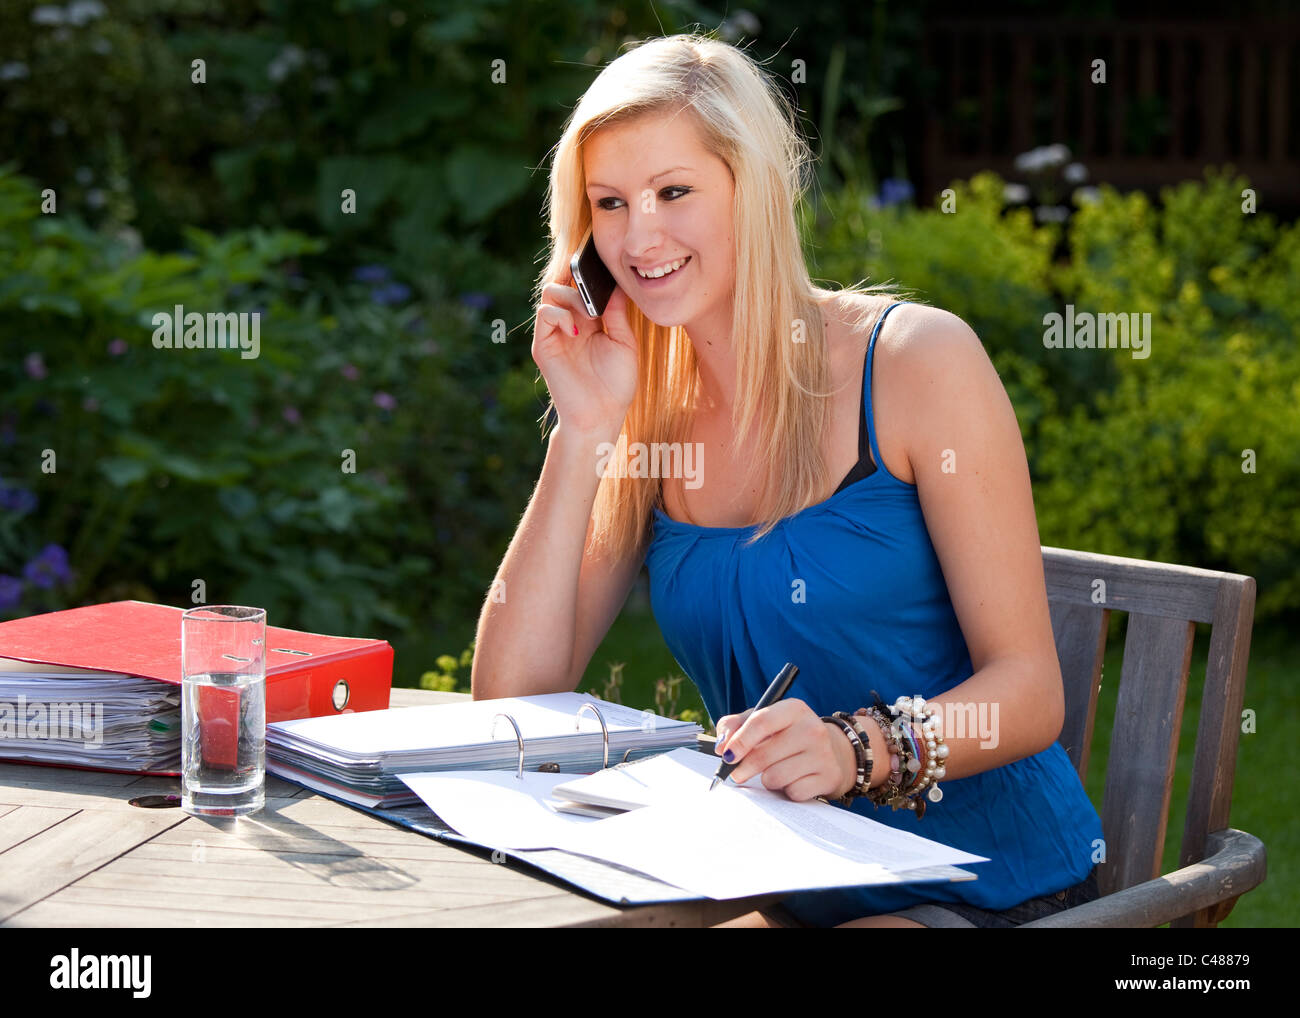 Happy teenage girl student working and chatting on moblie phone in garden Stock Photo